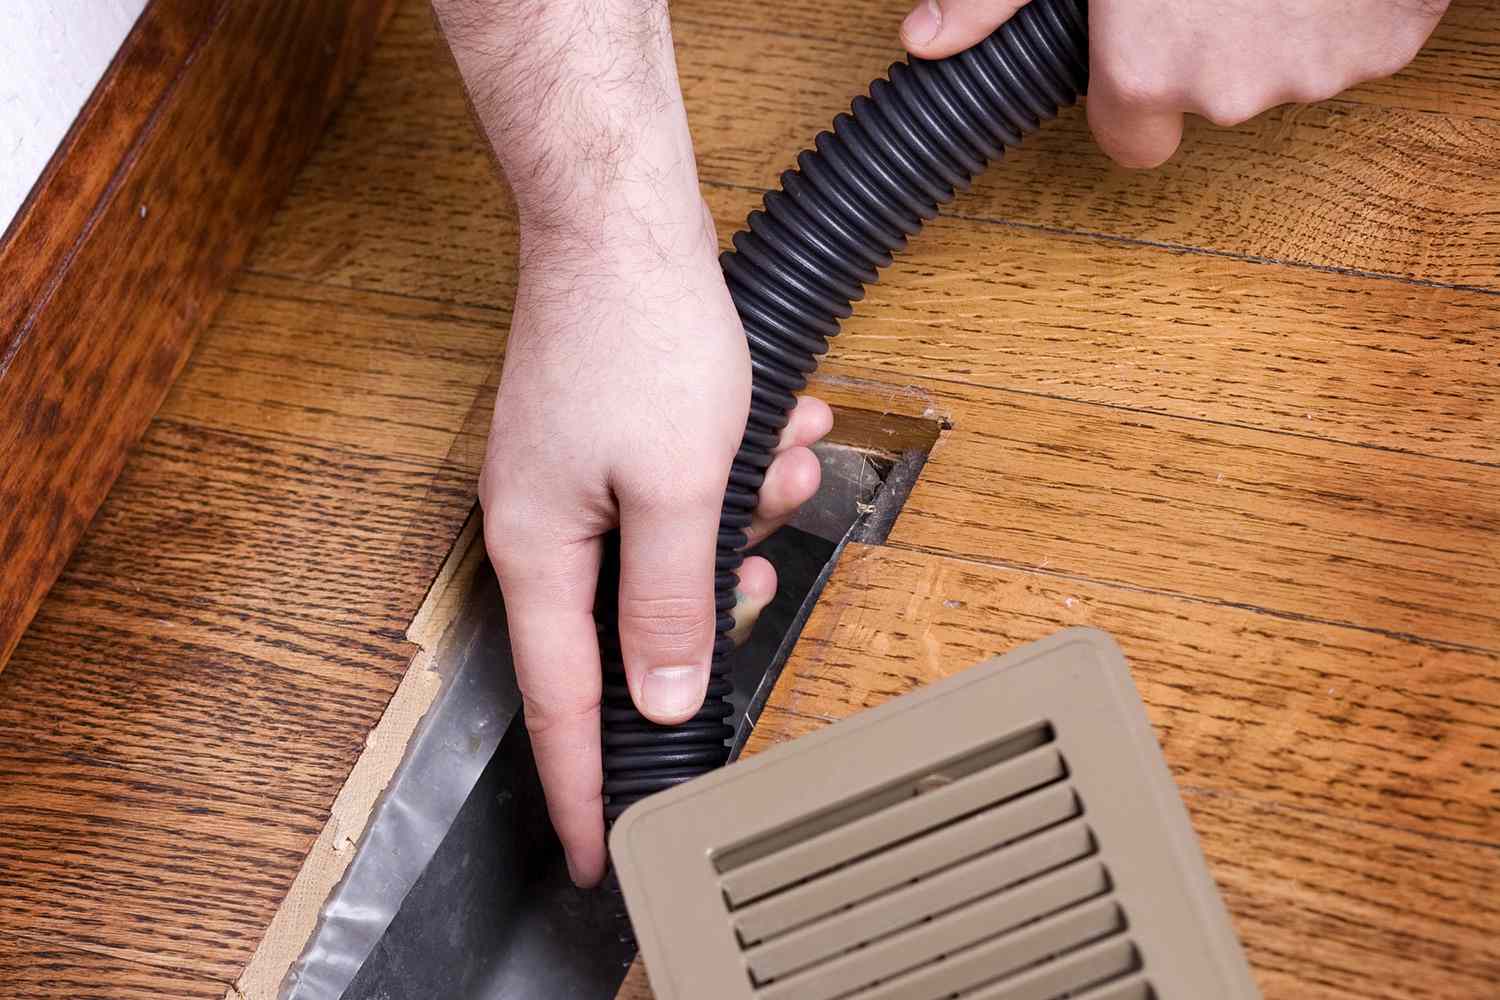 How To Clean Air Conditioner Vents In A House